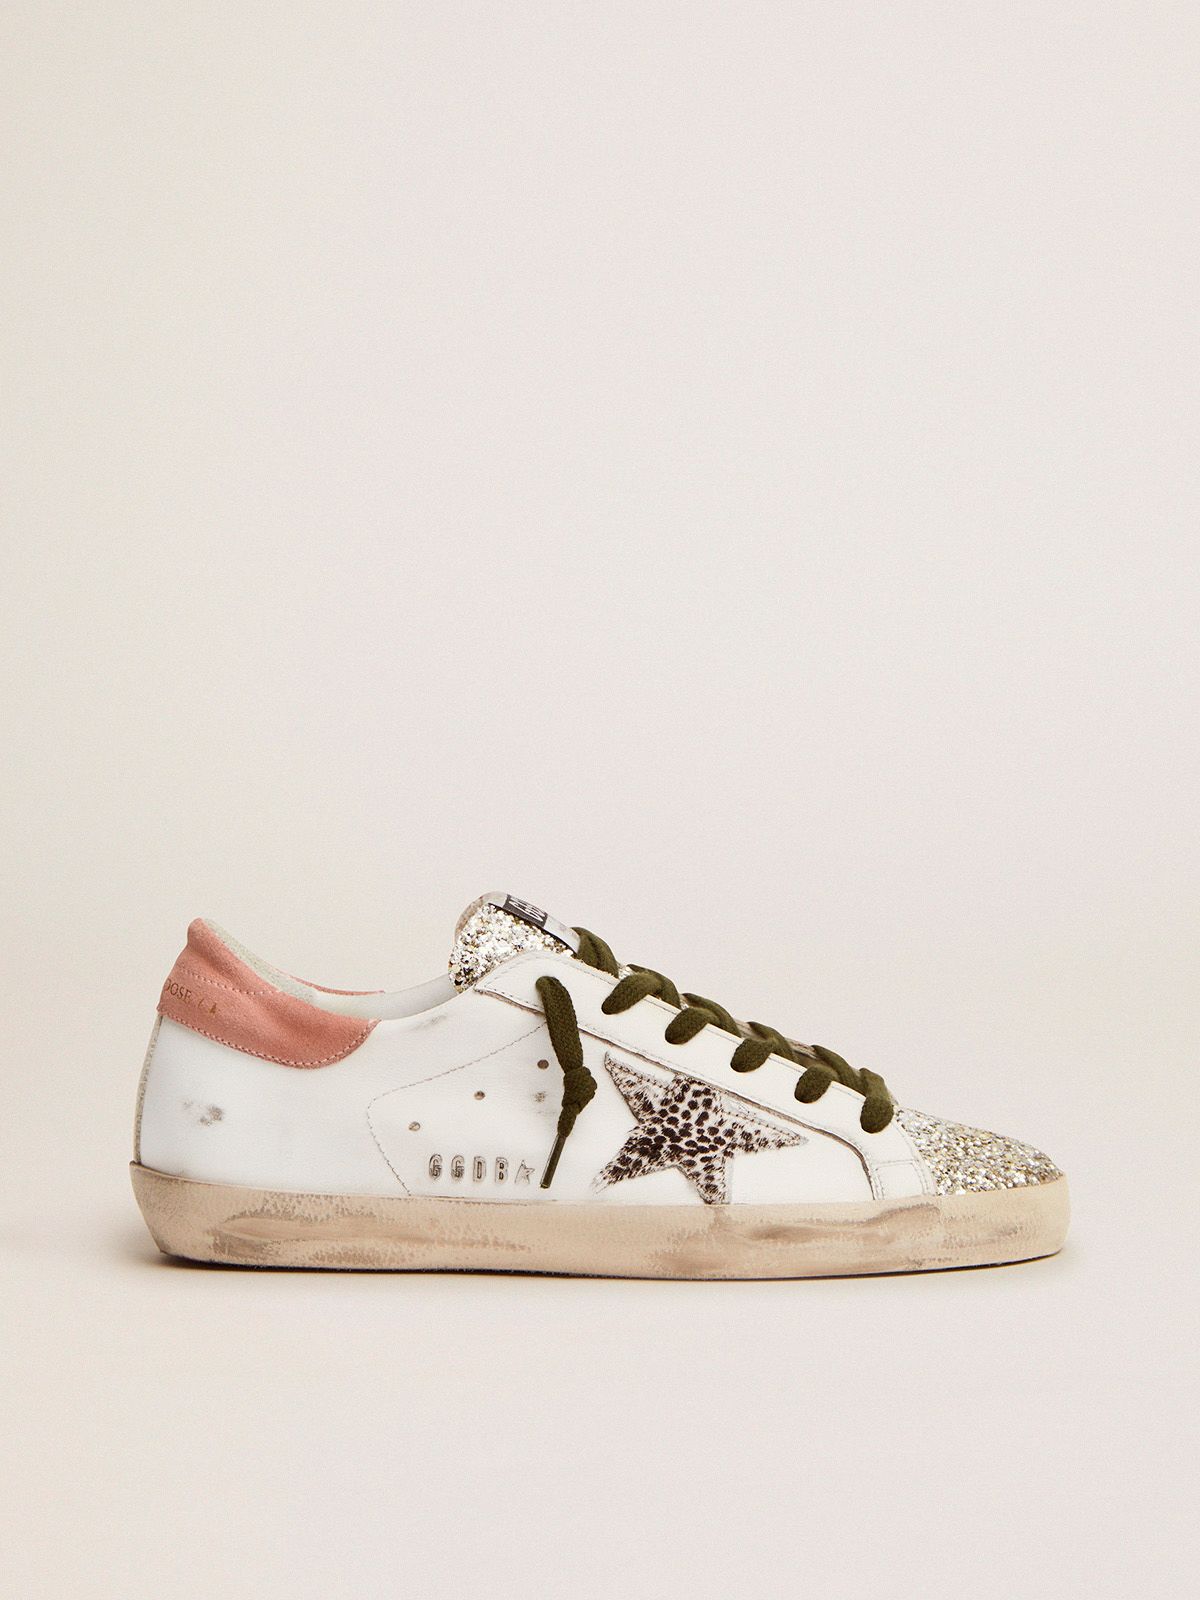 golden goose star silver glitter LTD with skin animal-print Super-Star and sneakers pony